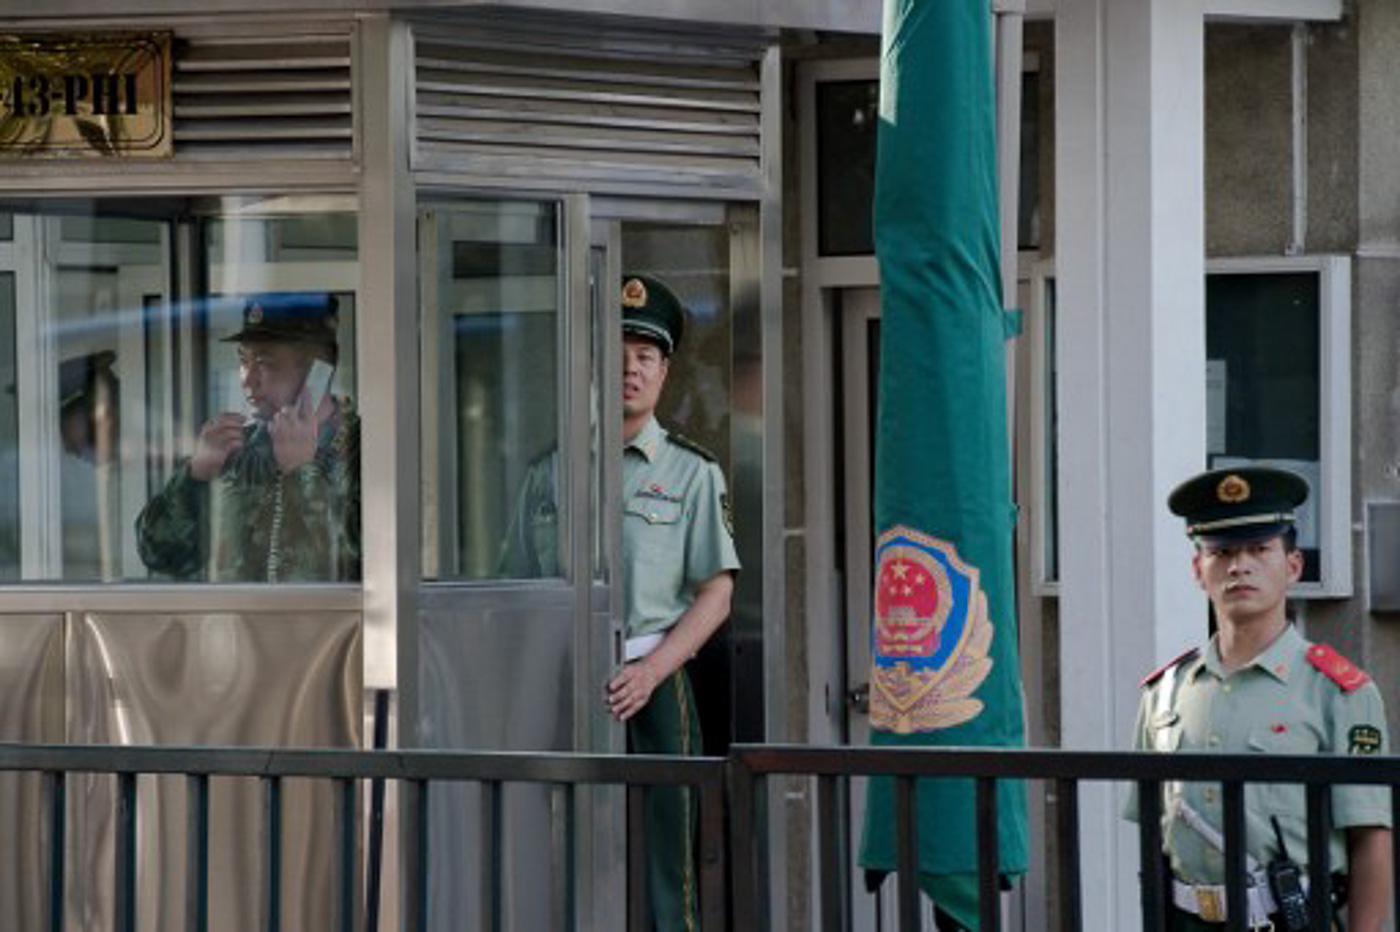 TIGHT SECURITY. Chinese paramilitary police officers secure the front entrance of the Philippines embassy in Beijing on July 12, 2016. Photo by Nicolas Asfouri/AFP 